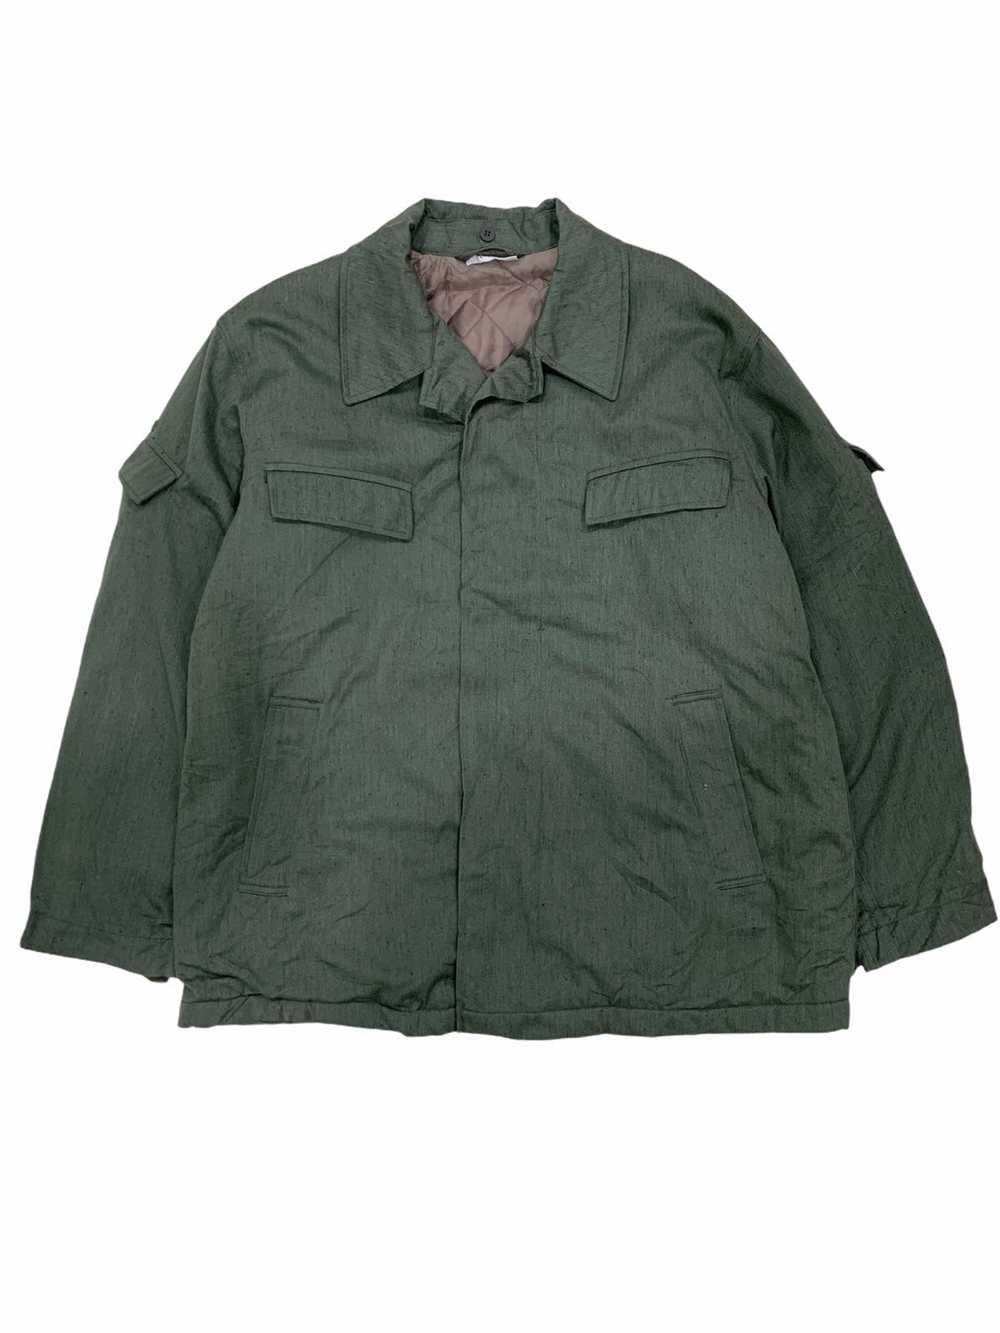 Military × WWII Impressions Military Shirts Butto… - image 1